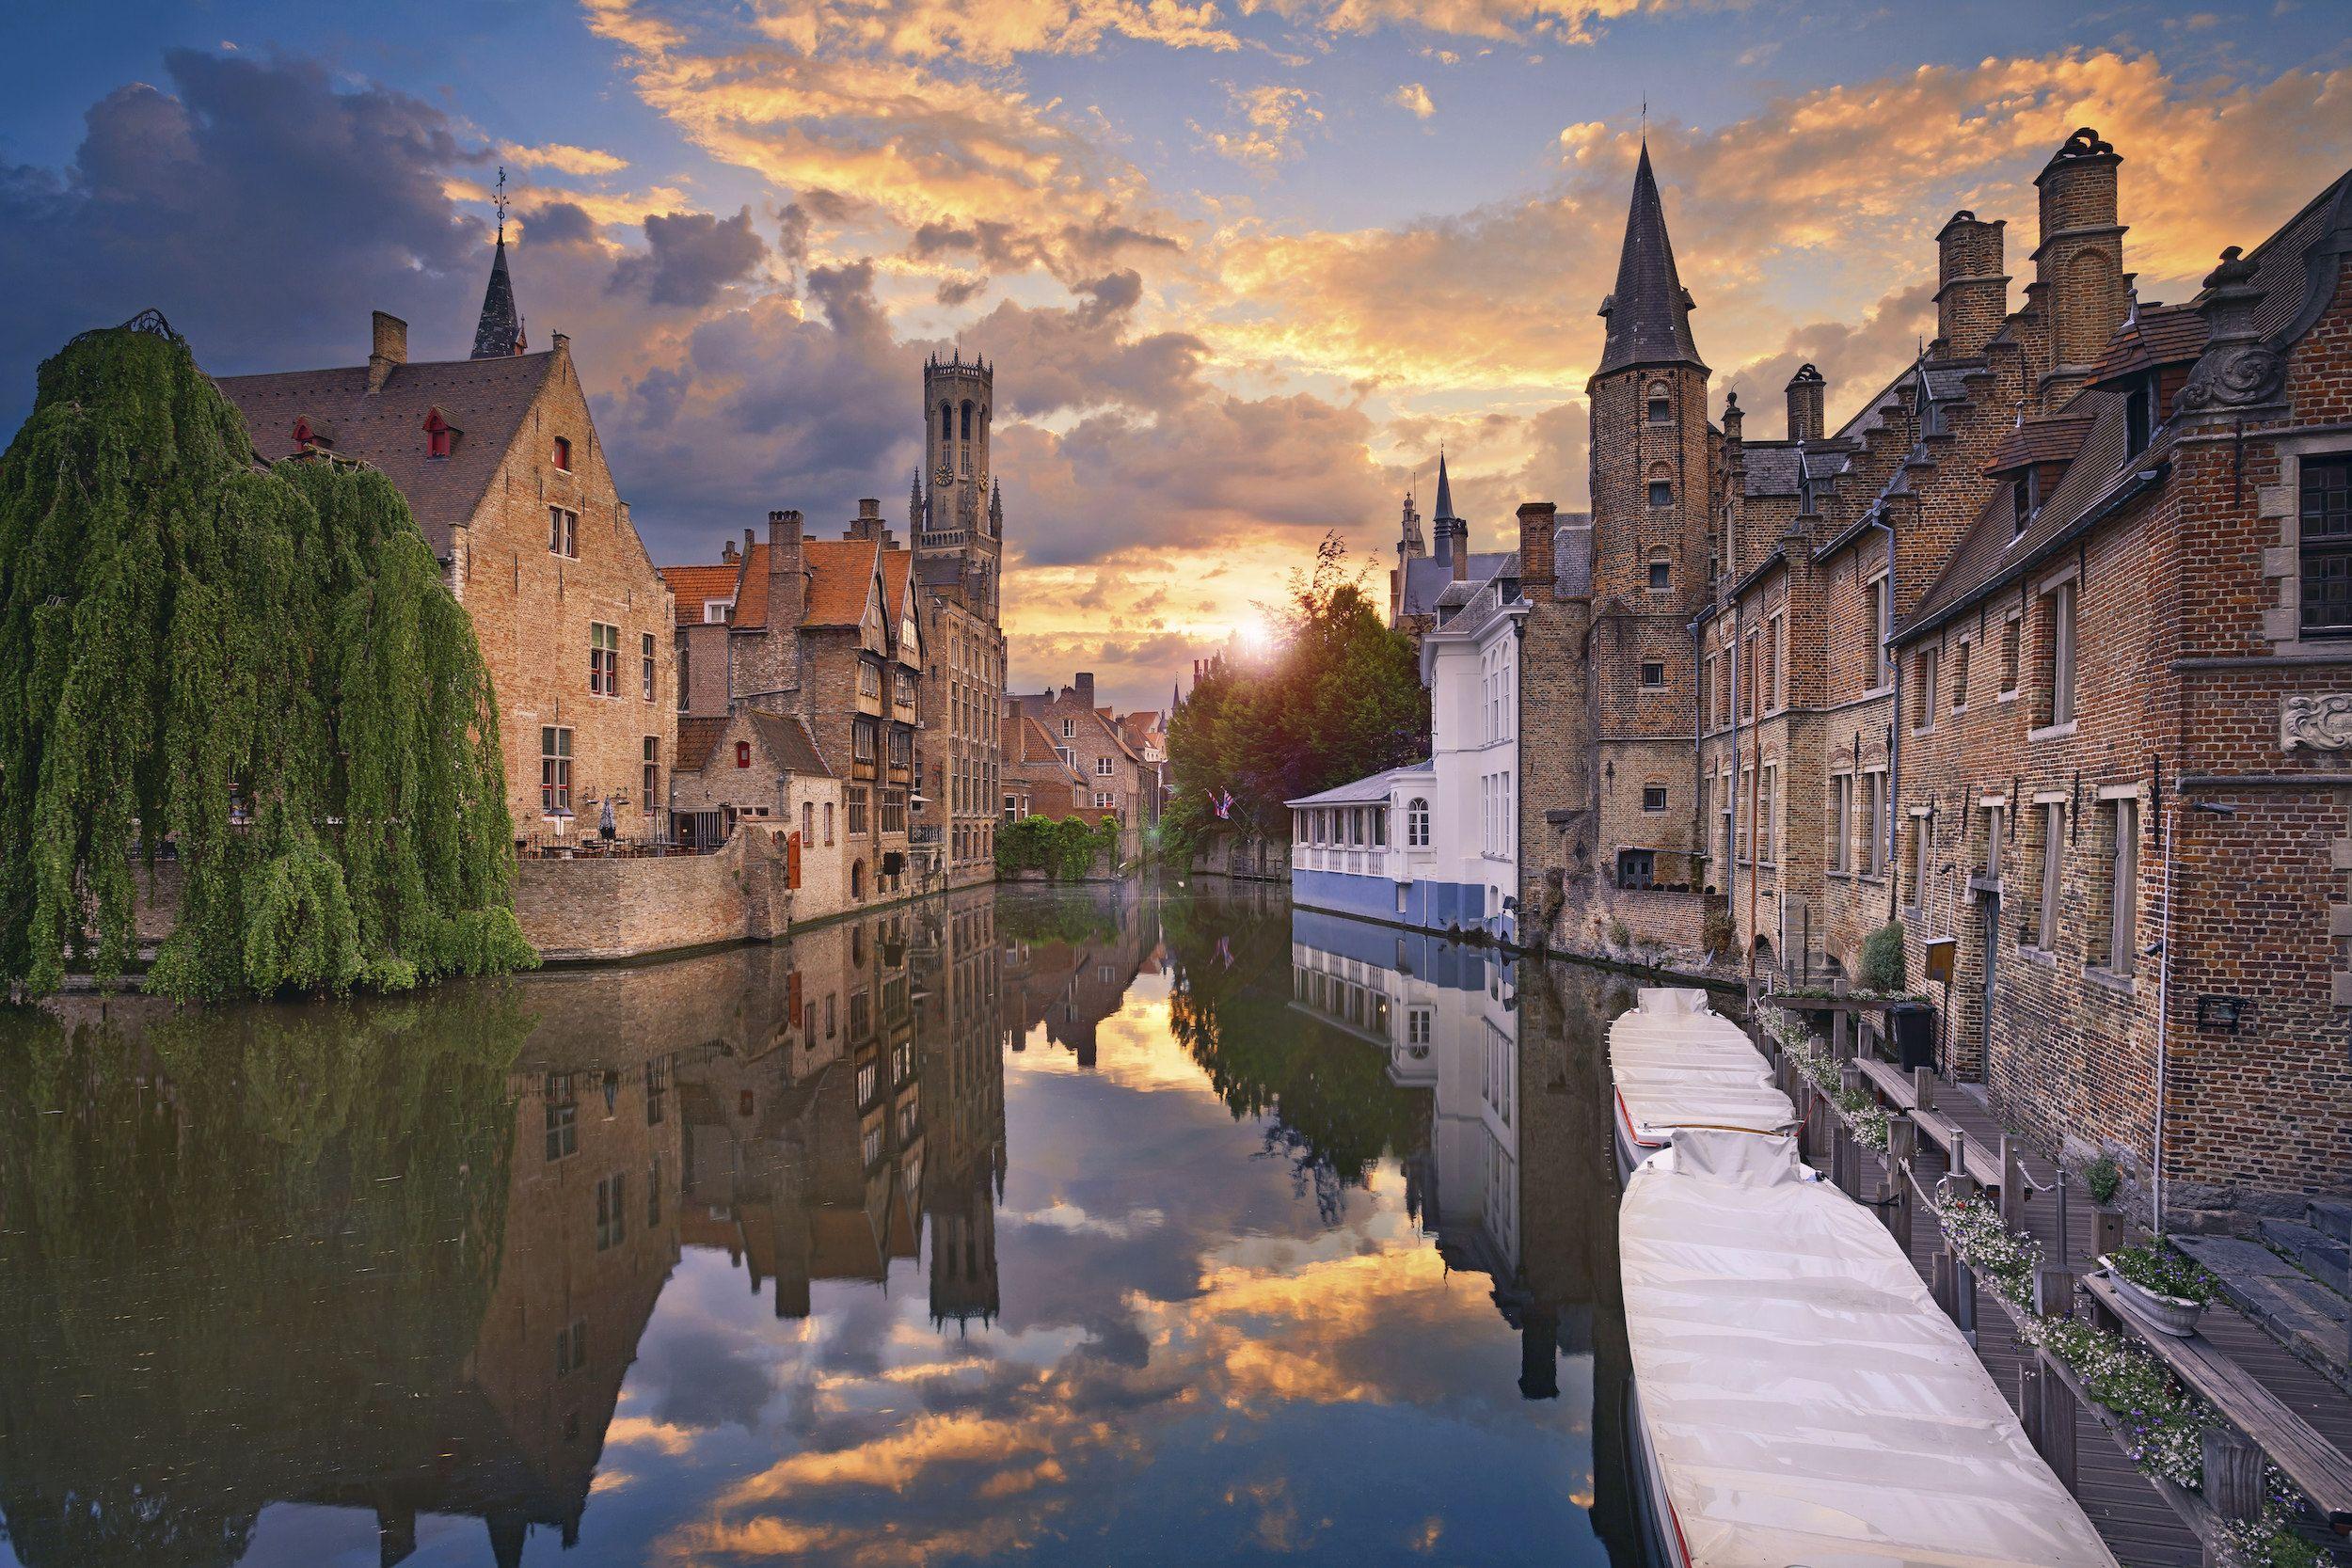 How to see the best of Brugge in two days